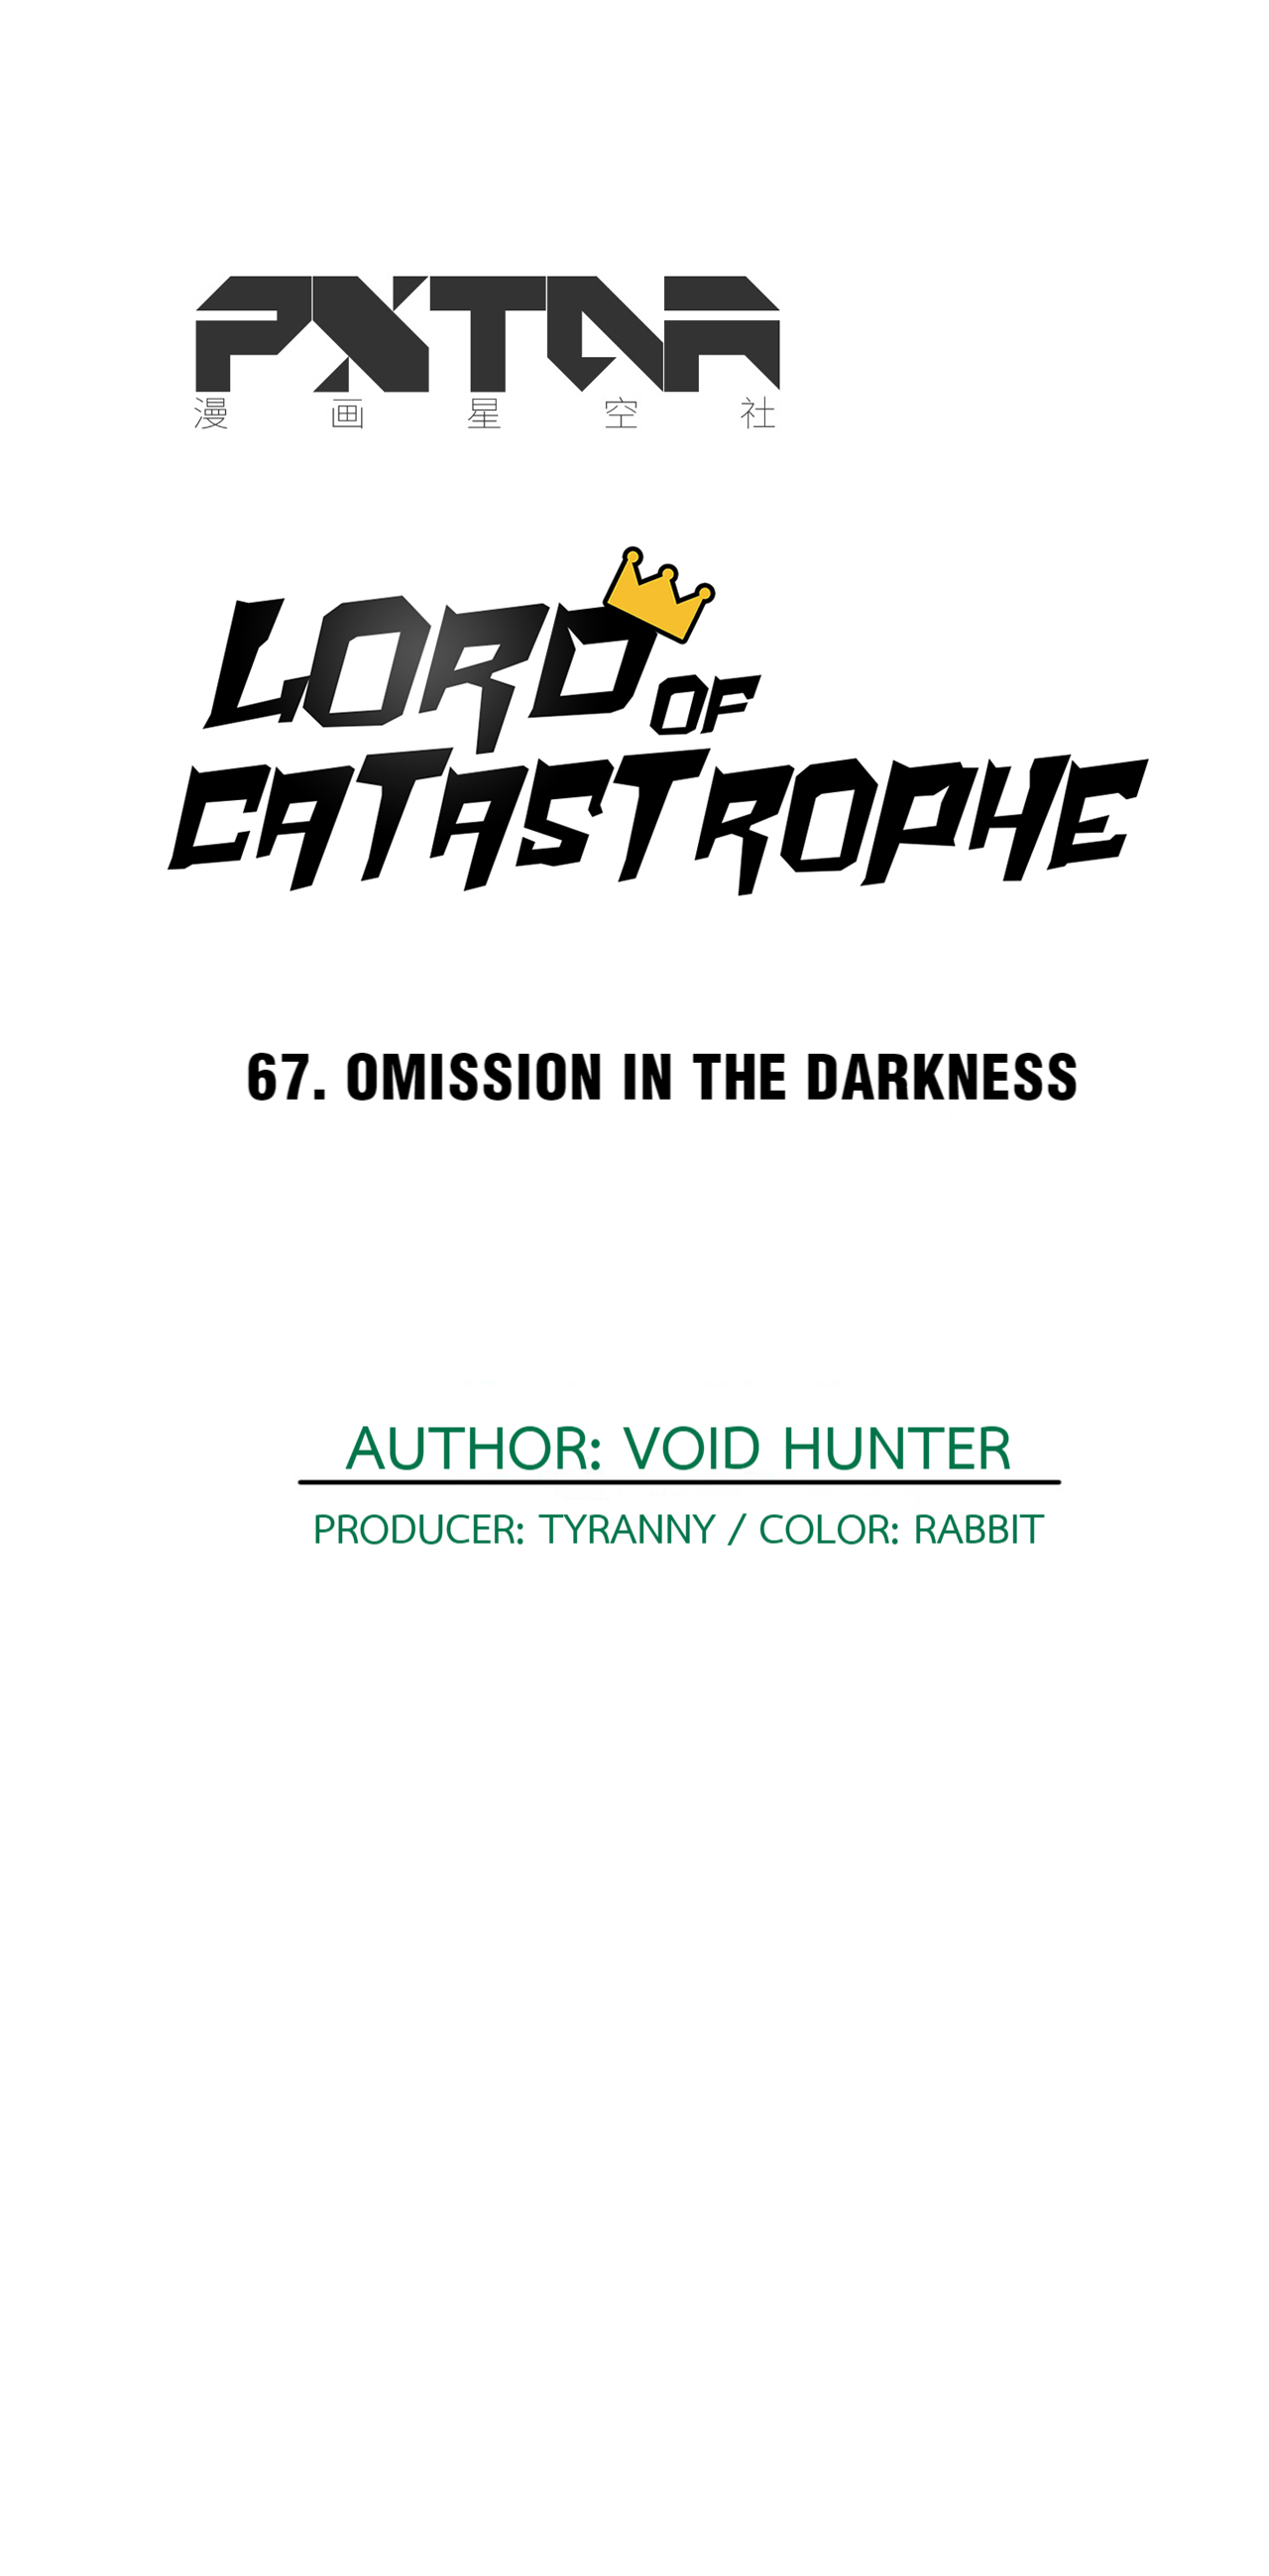 Lord of Catastrophe 67.1 Omission in the Darkness